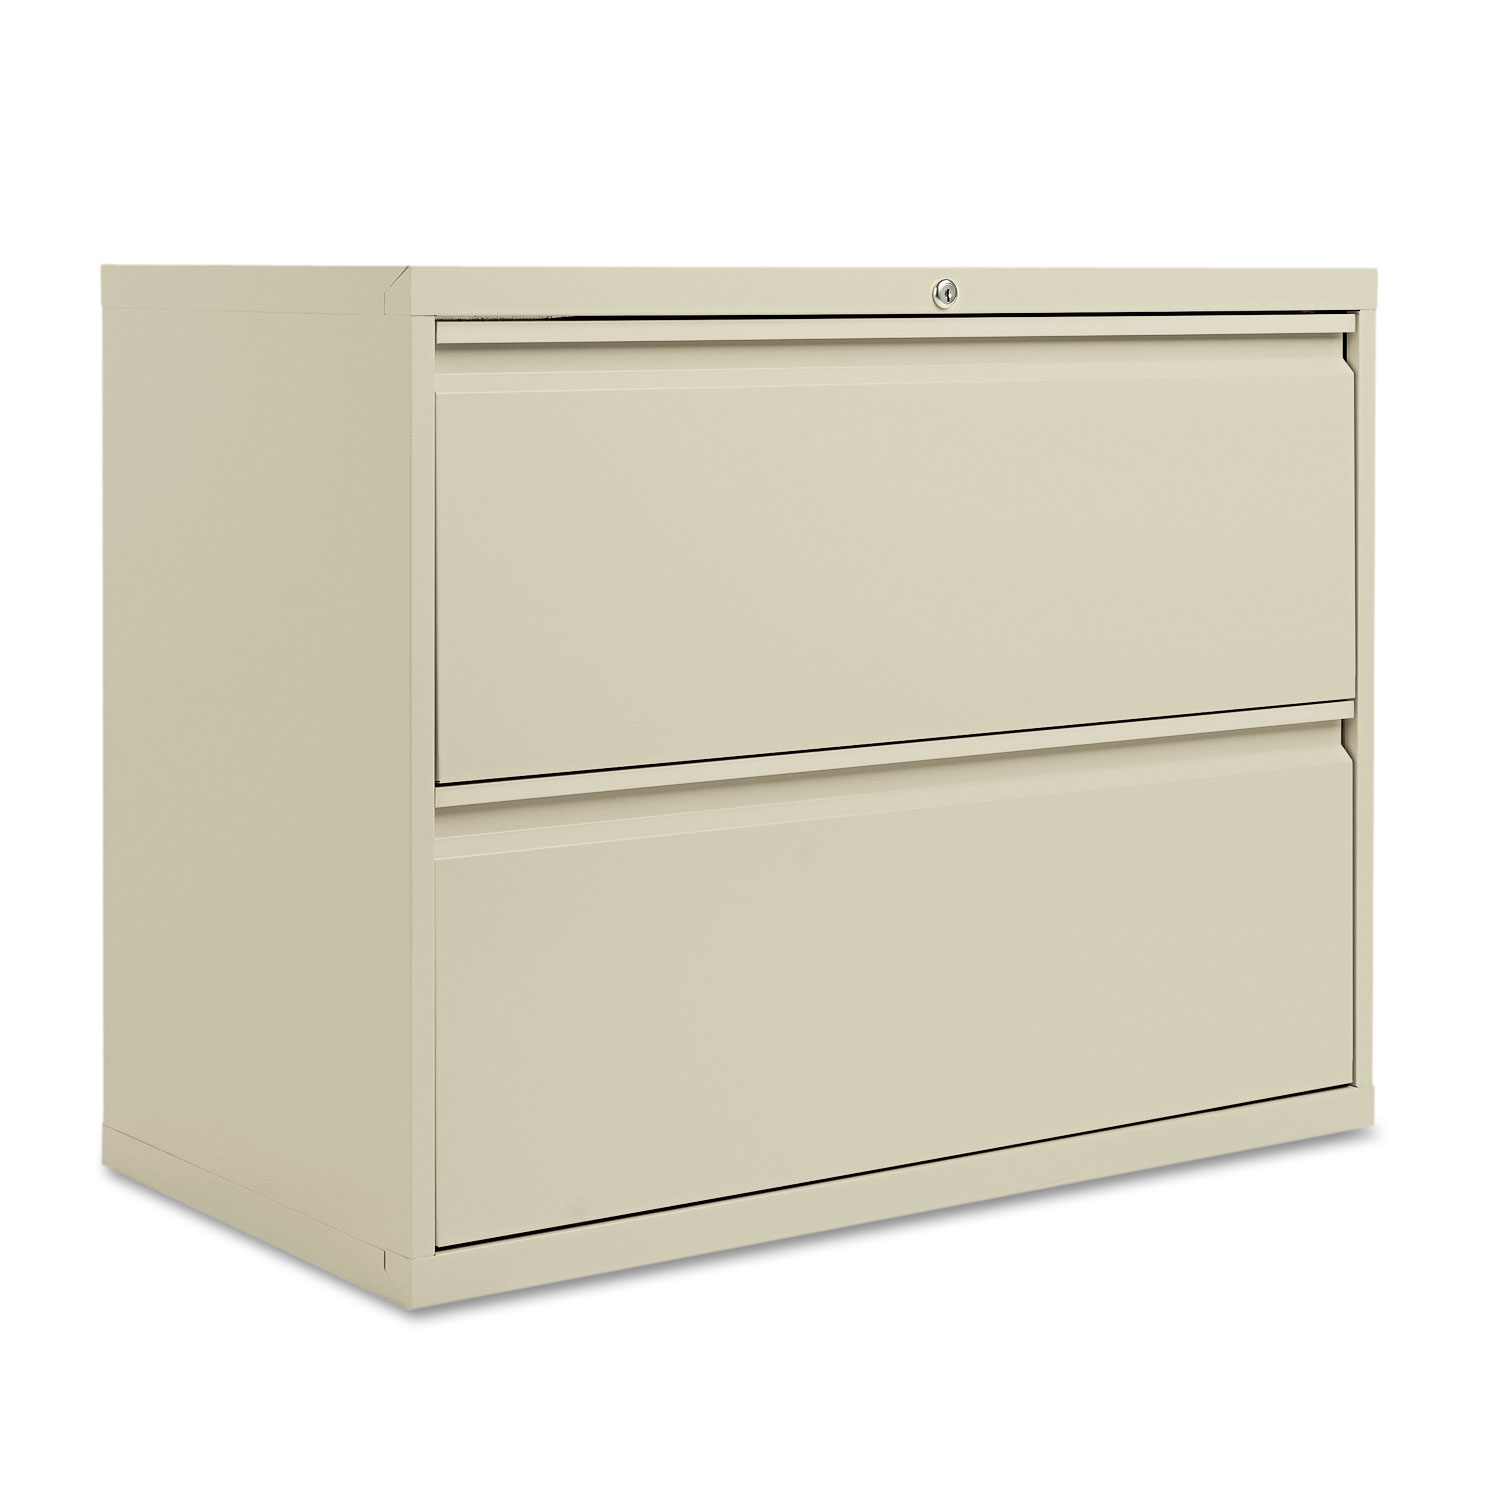  Alera ALELF3629PY Two-Drawer Lateral File Cabinet, 36w x 18d x 28h, Putty (ALELF3629PY) 